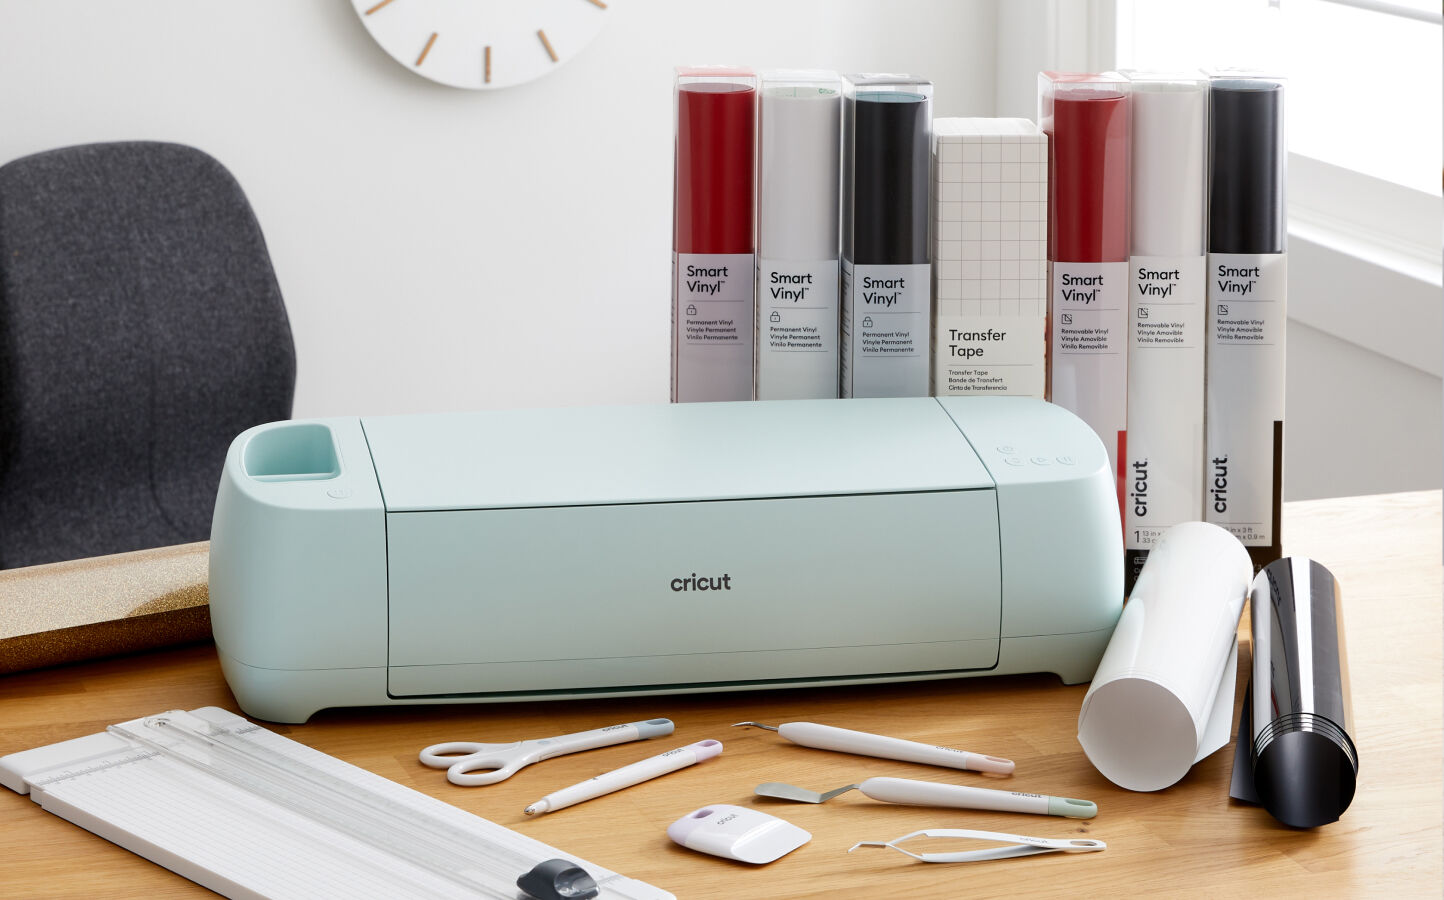 Save 50% on Cricut Products